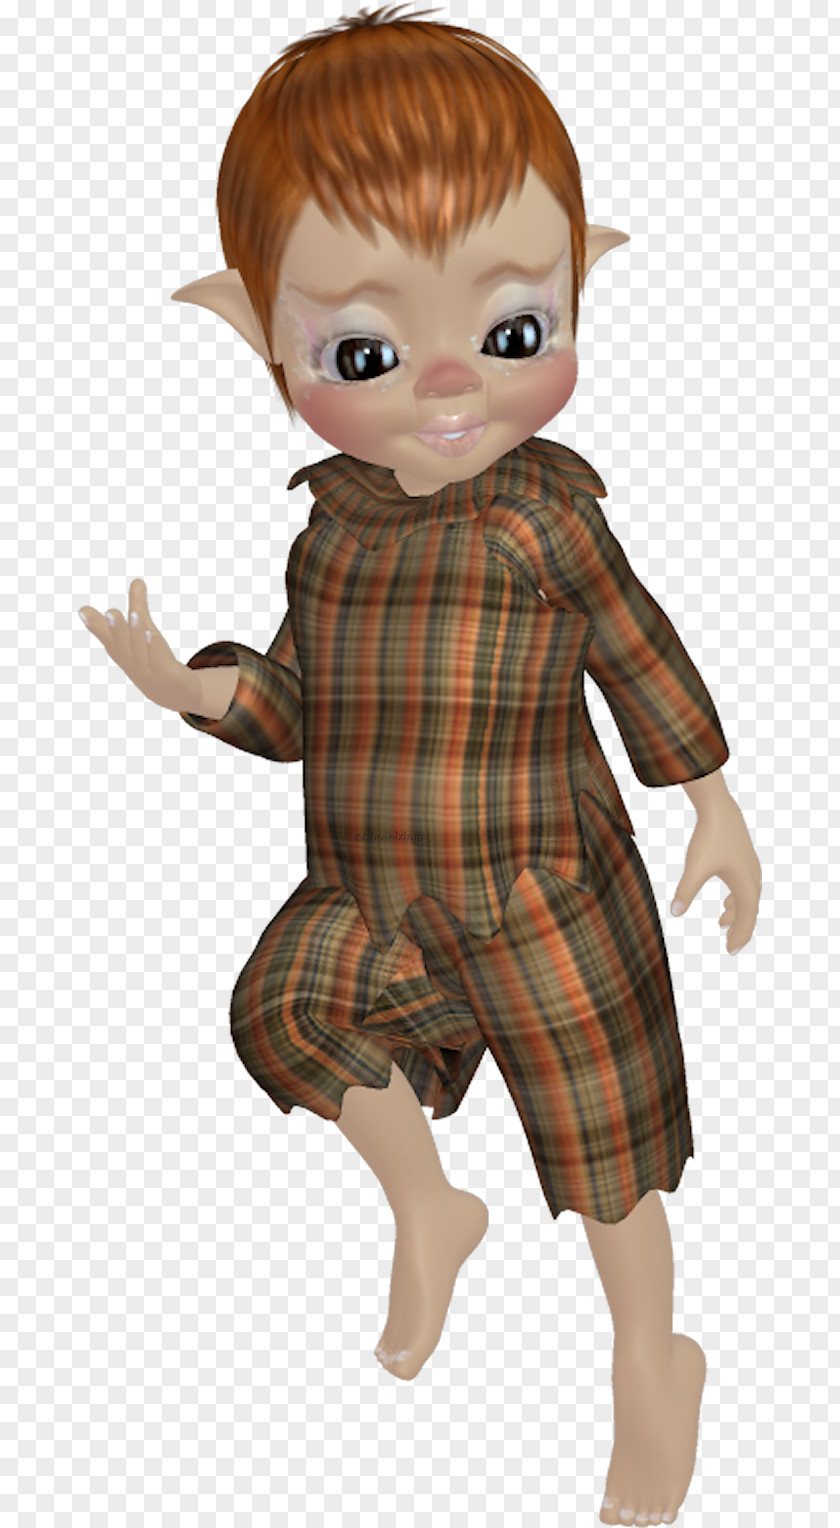 Doll Toddler Character Animated Cartoon PNG